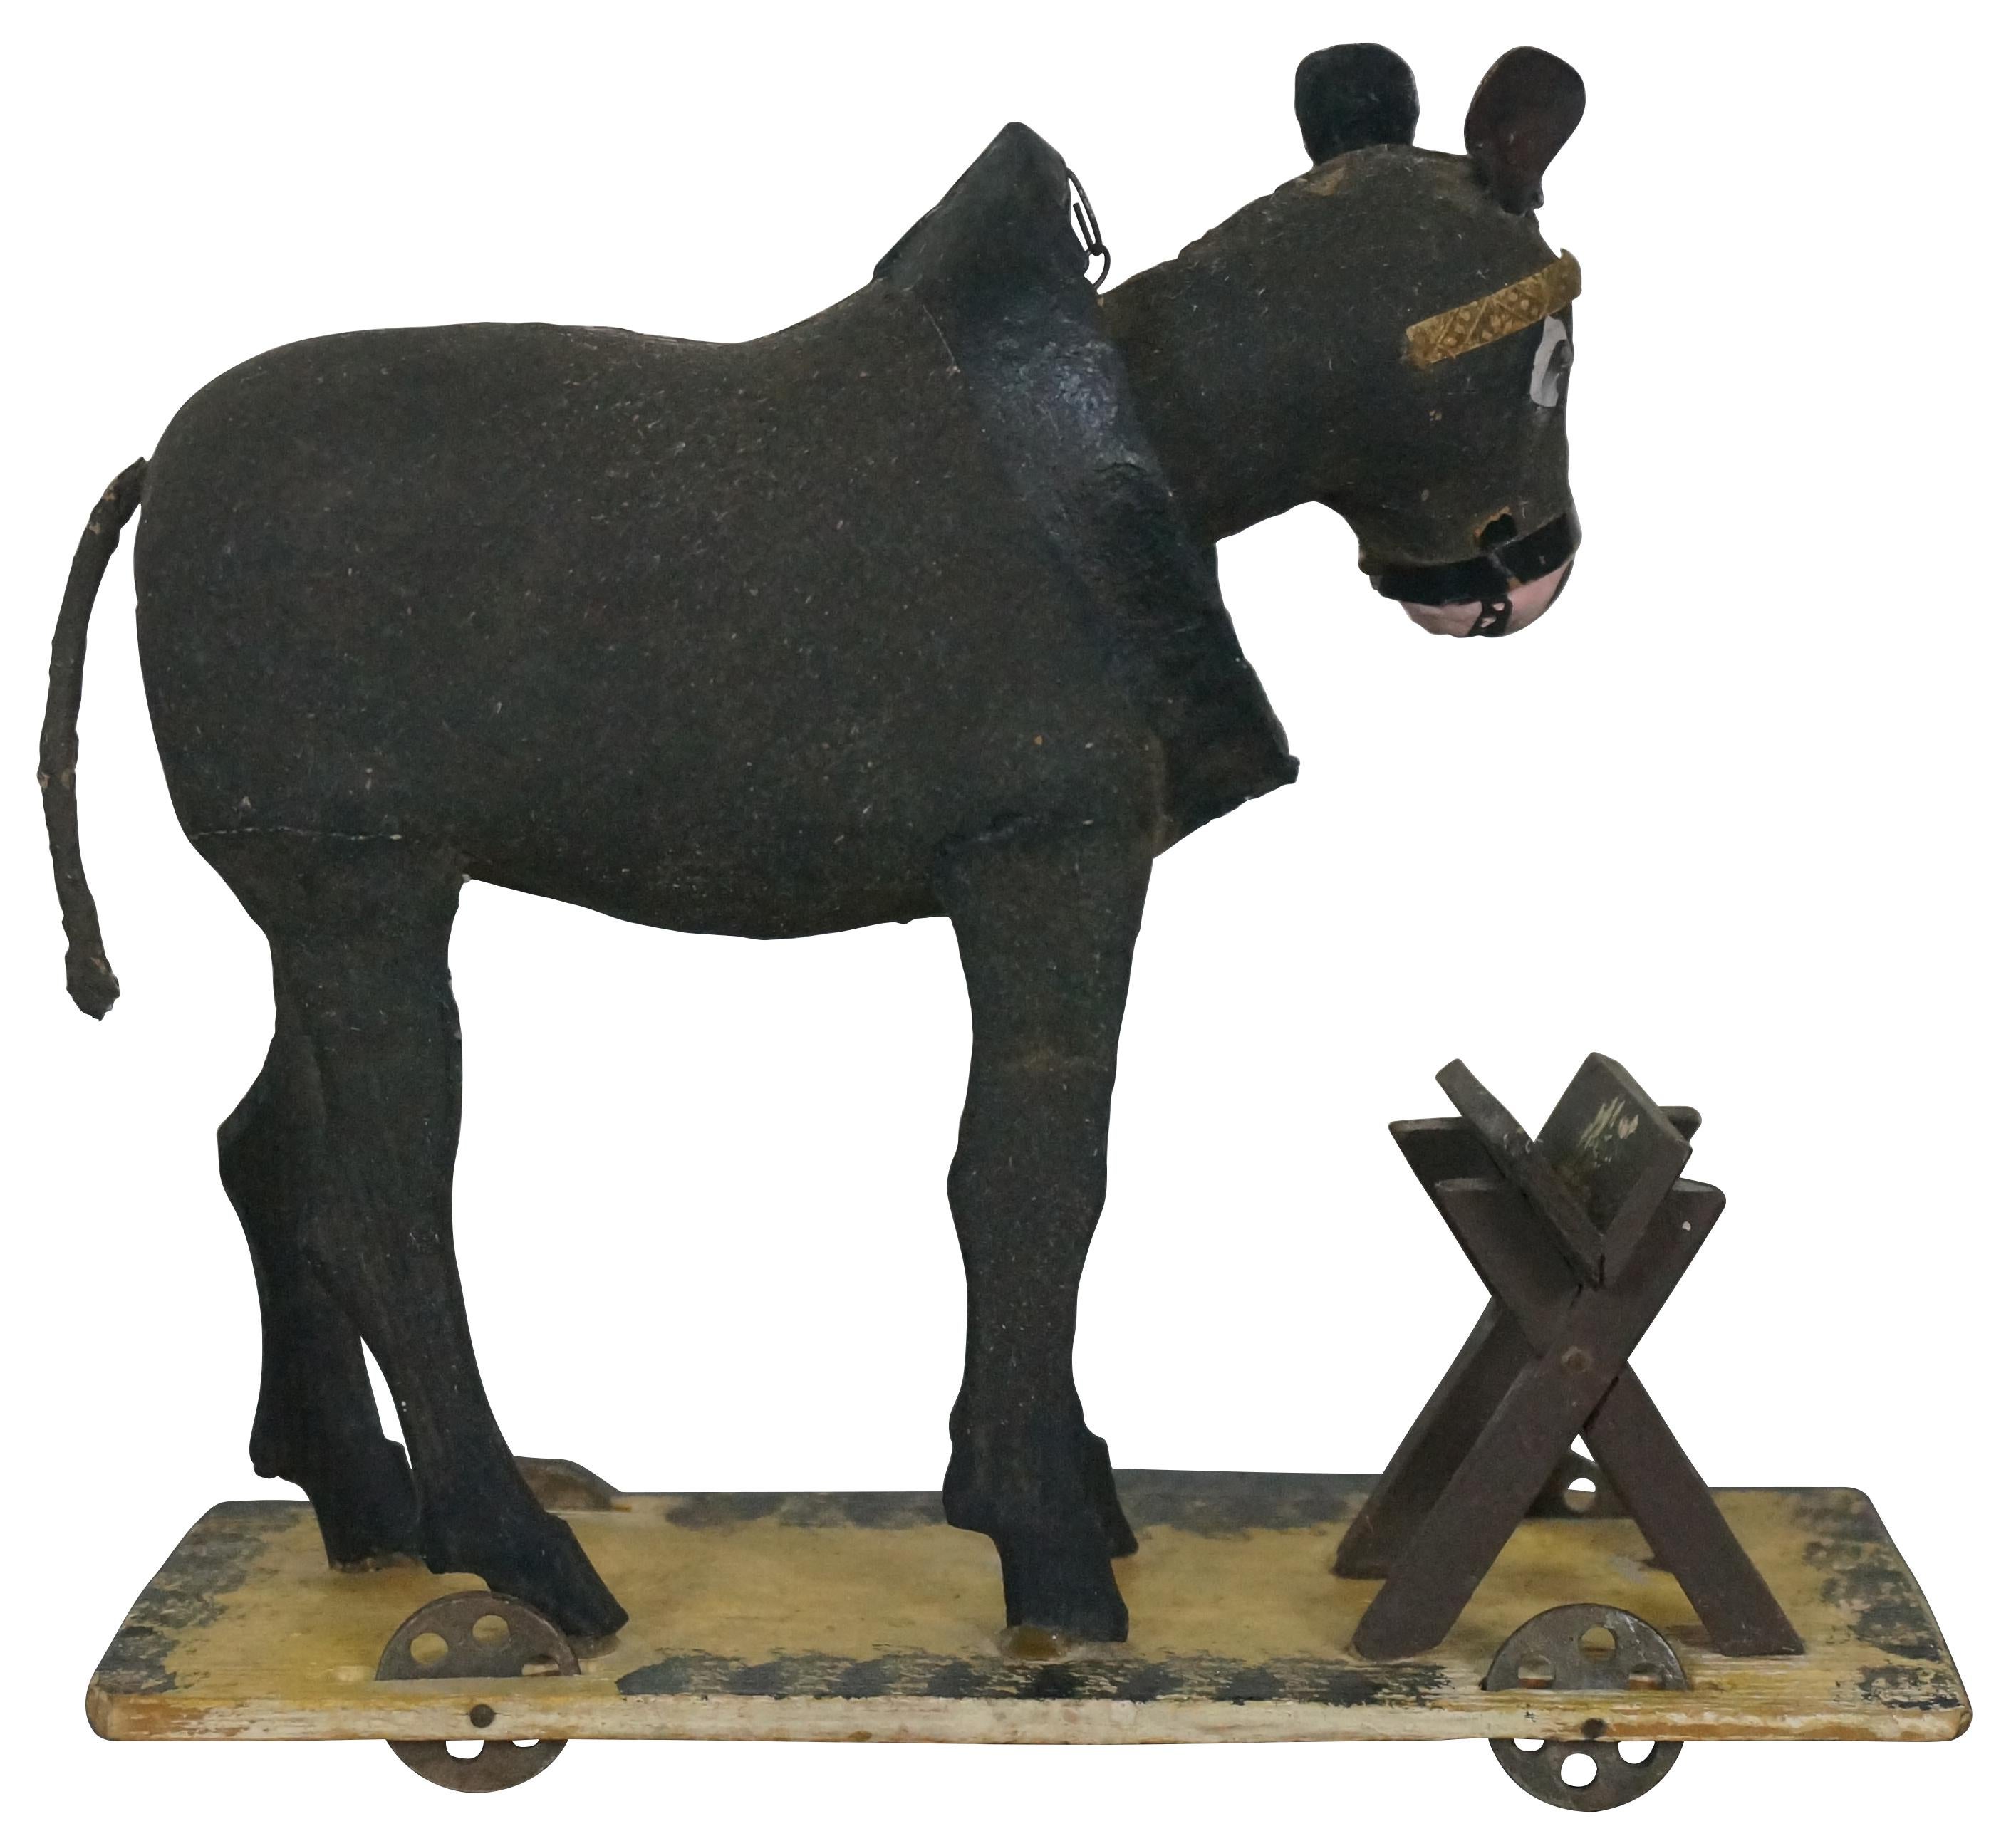 Rare antique German paper mache composition bobble head mule / donkey / horse pull toy figure standing with a small feed manger on a platform rolling cart. Size: 7.5